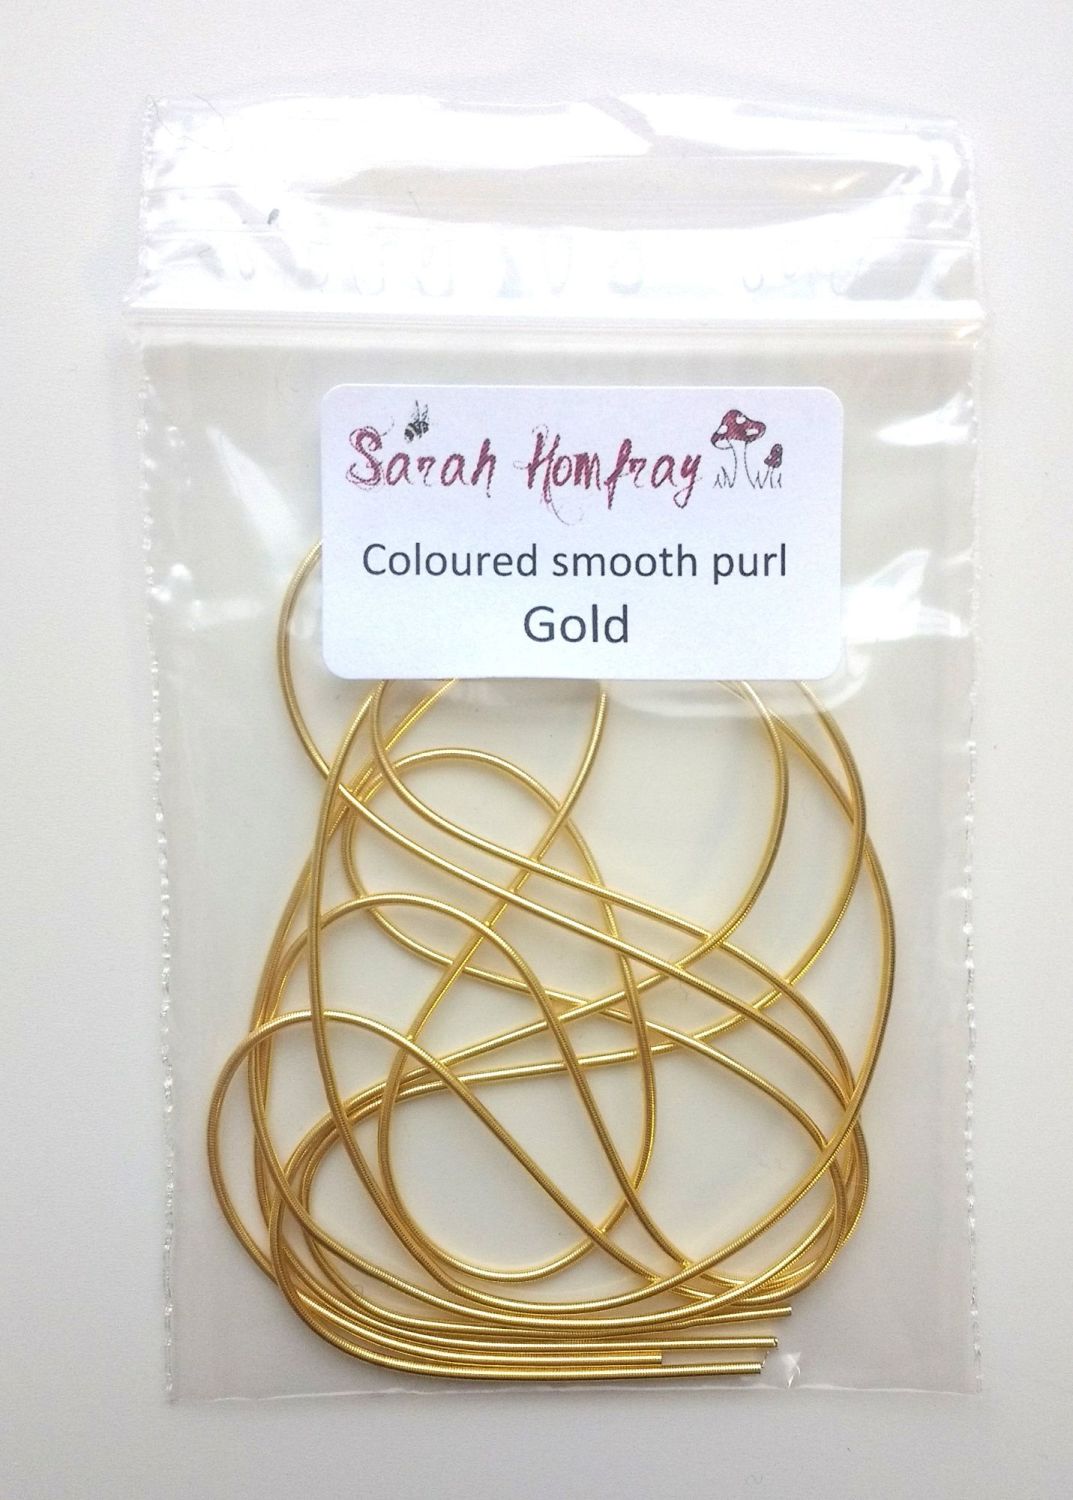 NEW! Coloured smooth purl no.6 - Gold